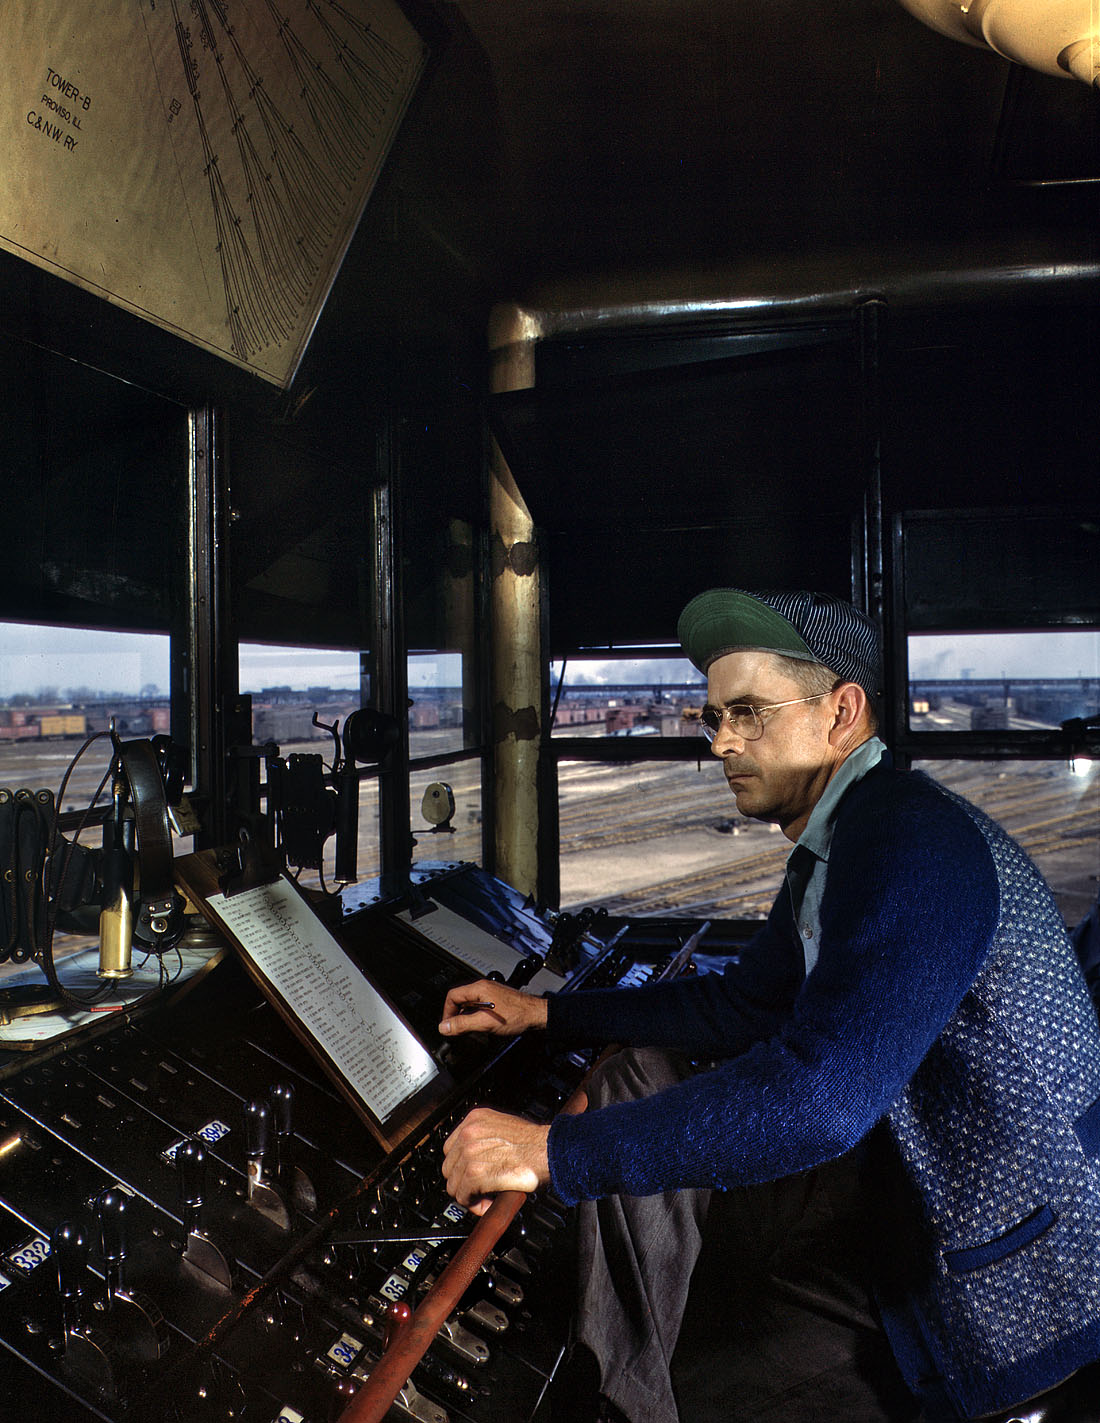 May 1943. Melrose Park, Ill. Chicago & North Western towerman R.W. Mayberry of Elmhurst at the Proviso Yard. He operates a set of retarders and switches at the hump. View full size. 4x5 Kodachrome transparency by Jack Delano.